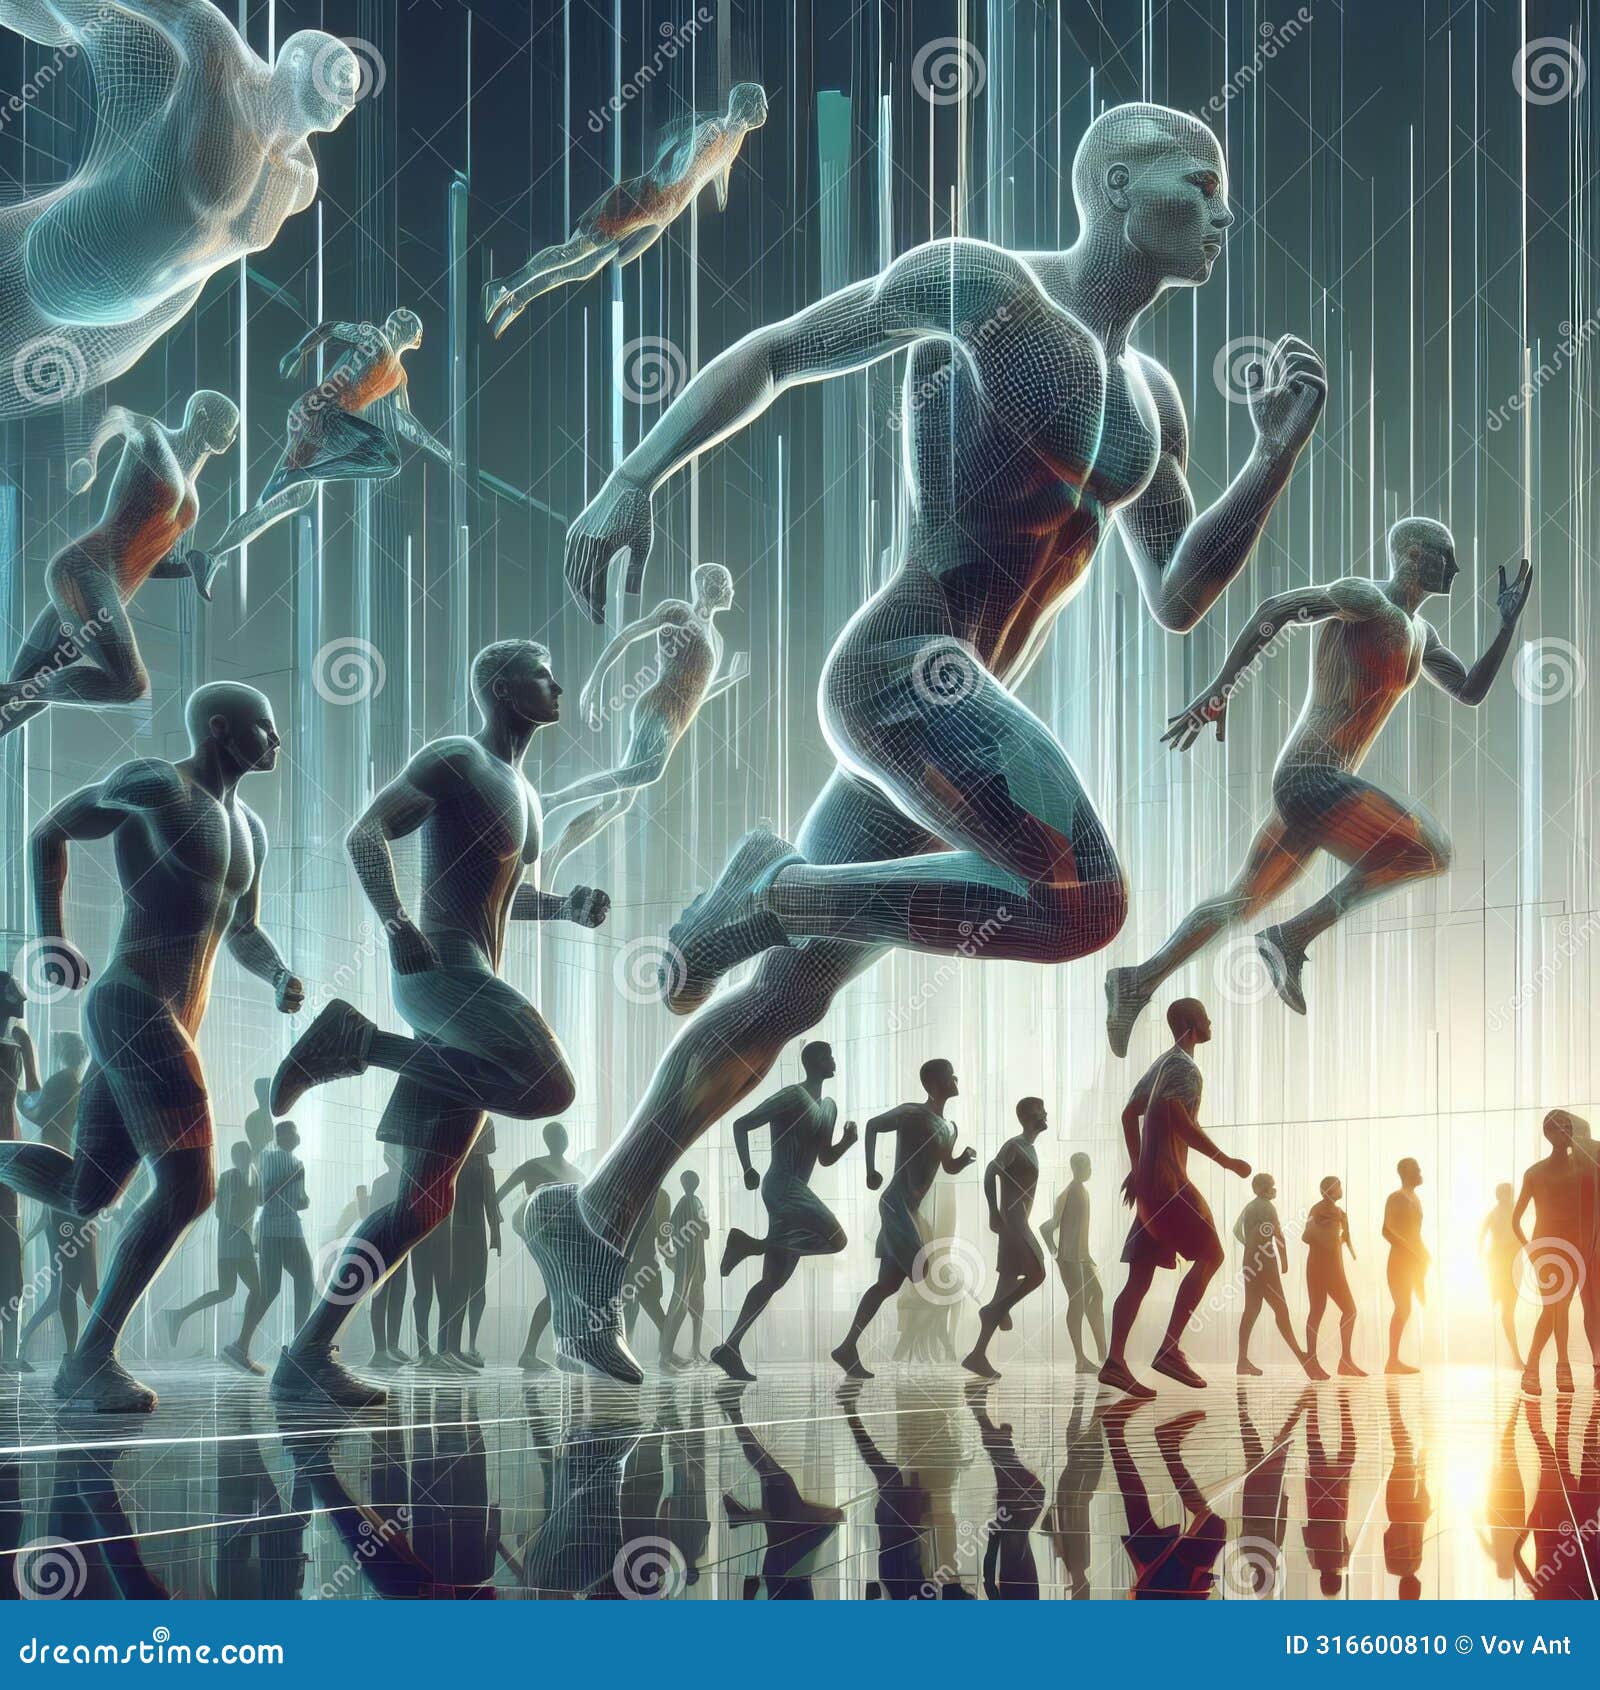 a surrealistic hologram display of athletes transformed into a